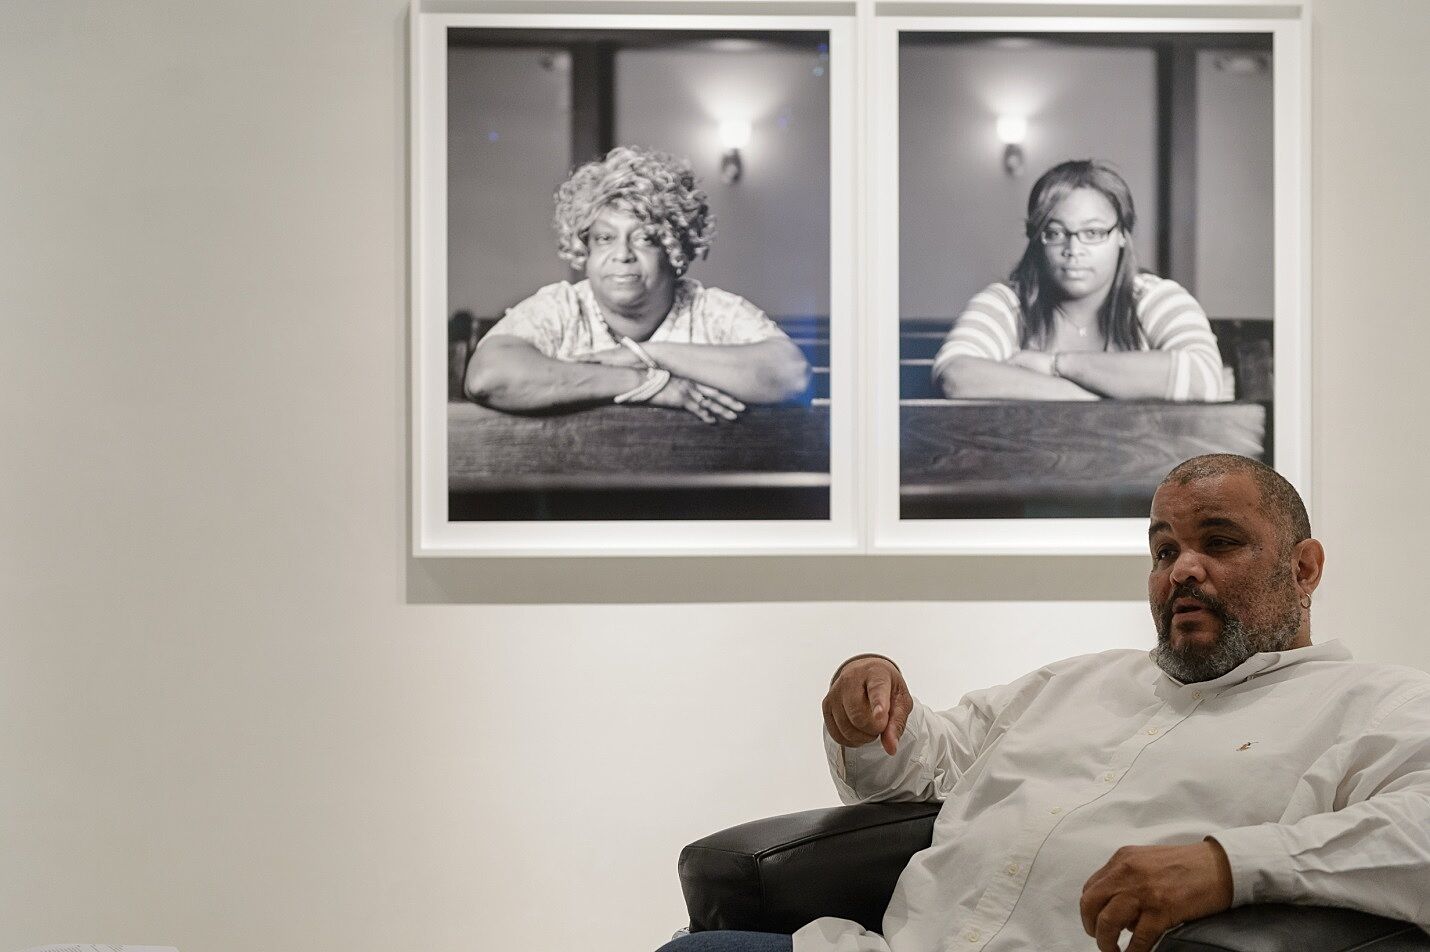 The photographer Dawoud Bey talks about his work in front of a black and white photo.